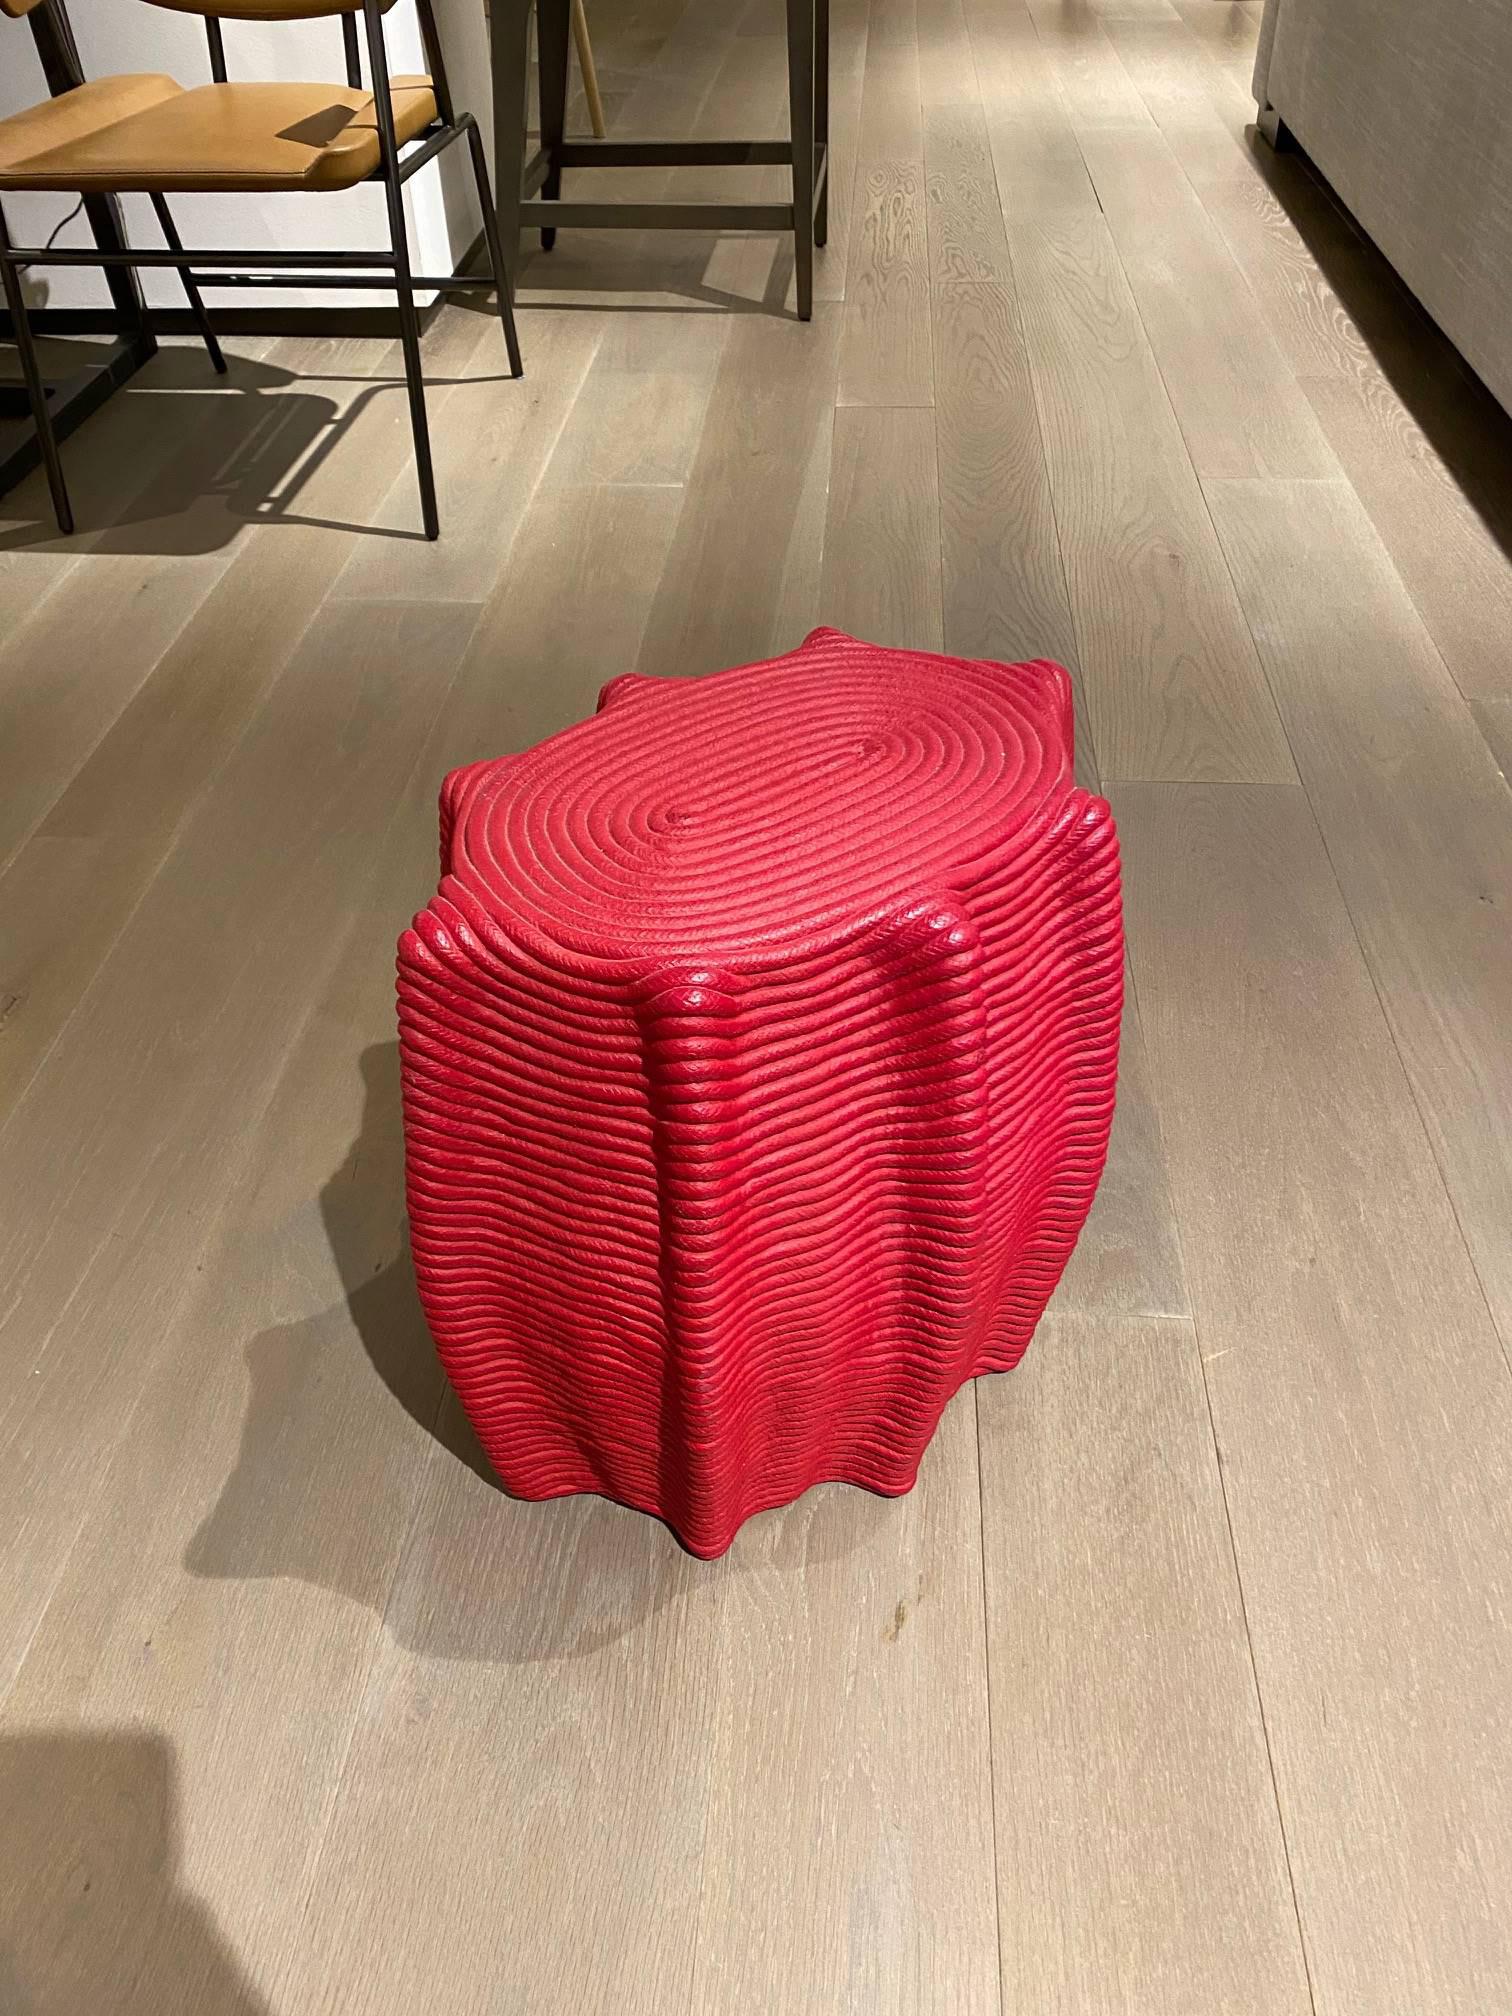 HOLLY HUNT Mivalo Stool in Carmin Red Cotton Cord by Christian Astuguevieille 2